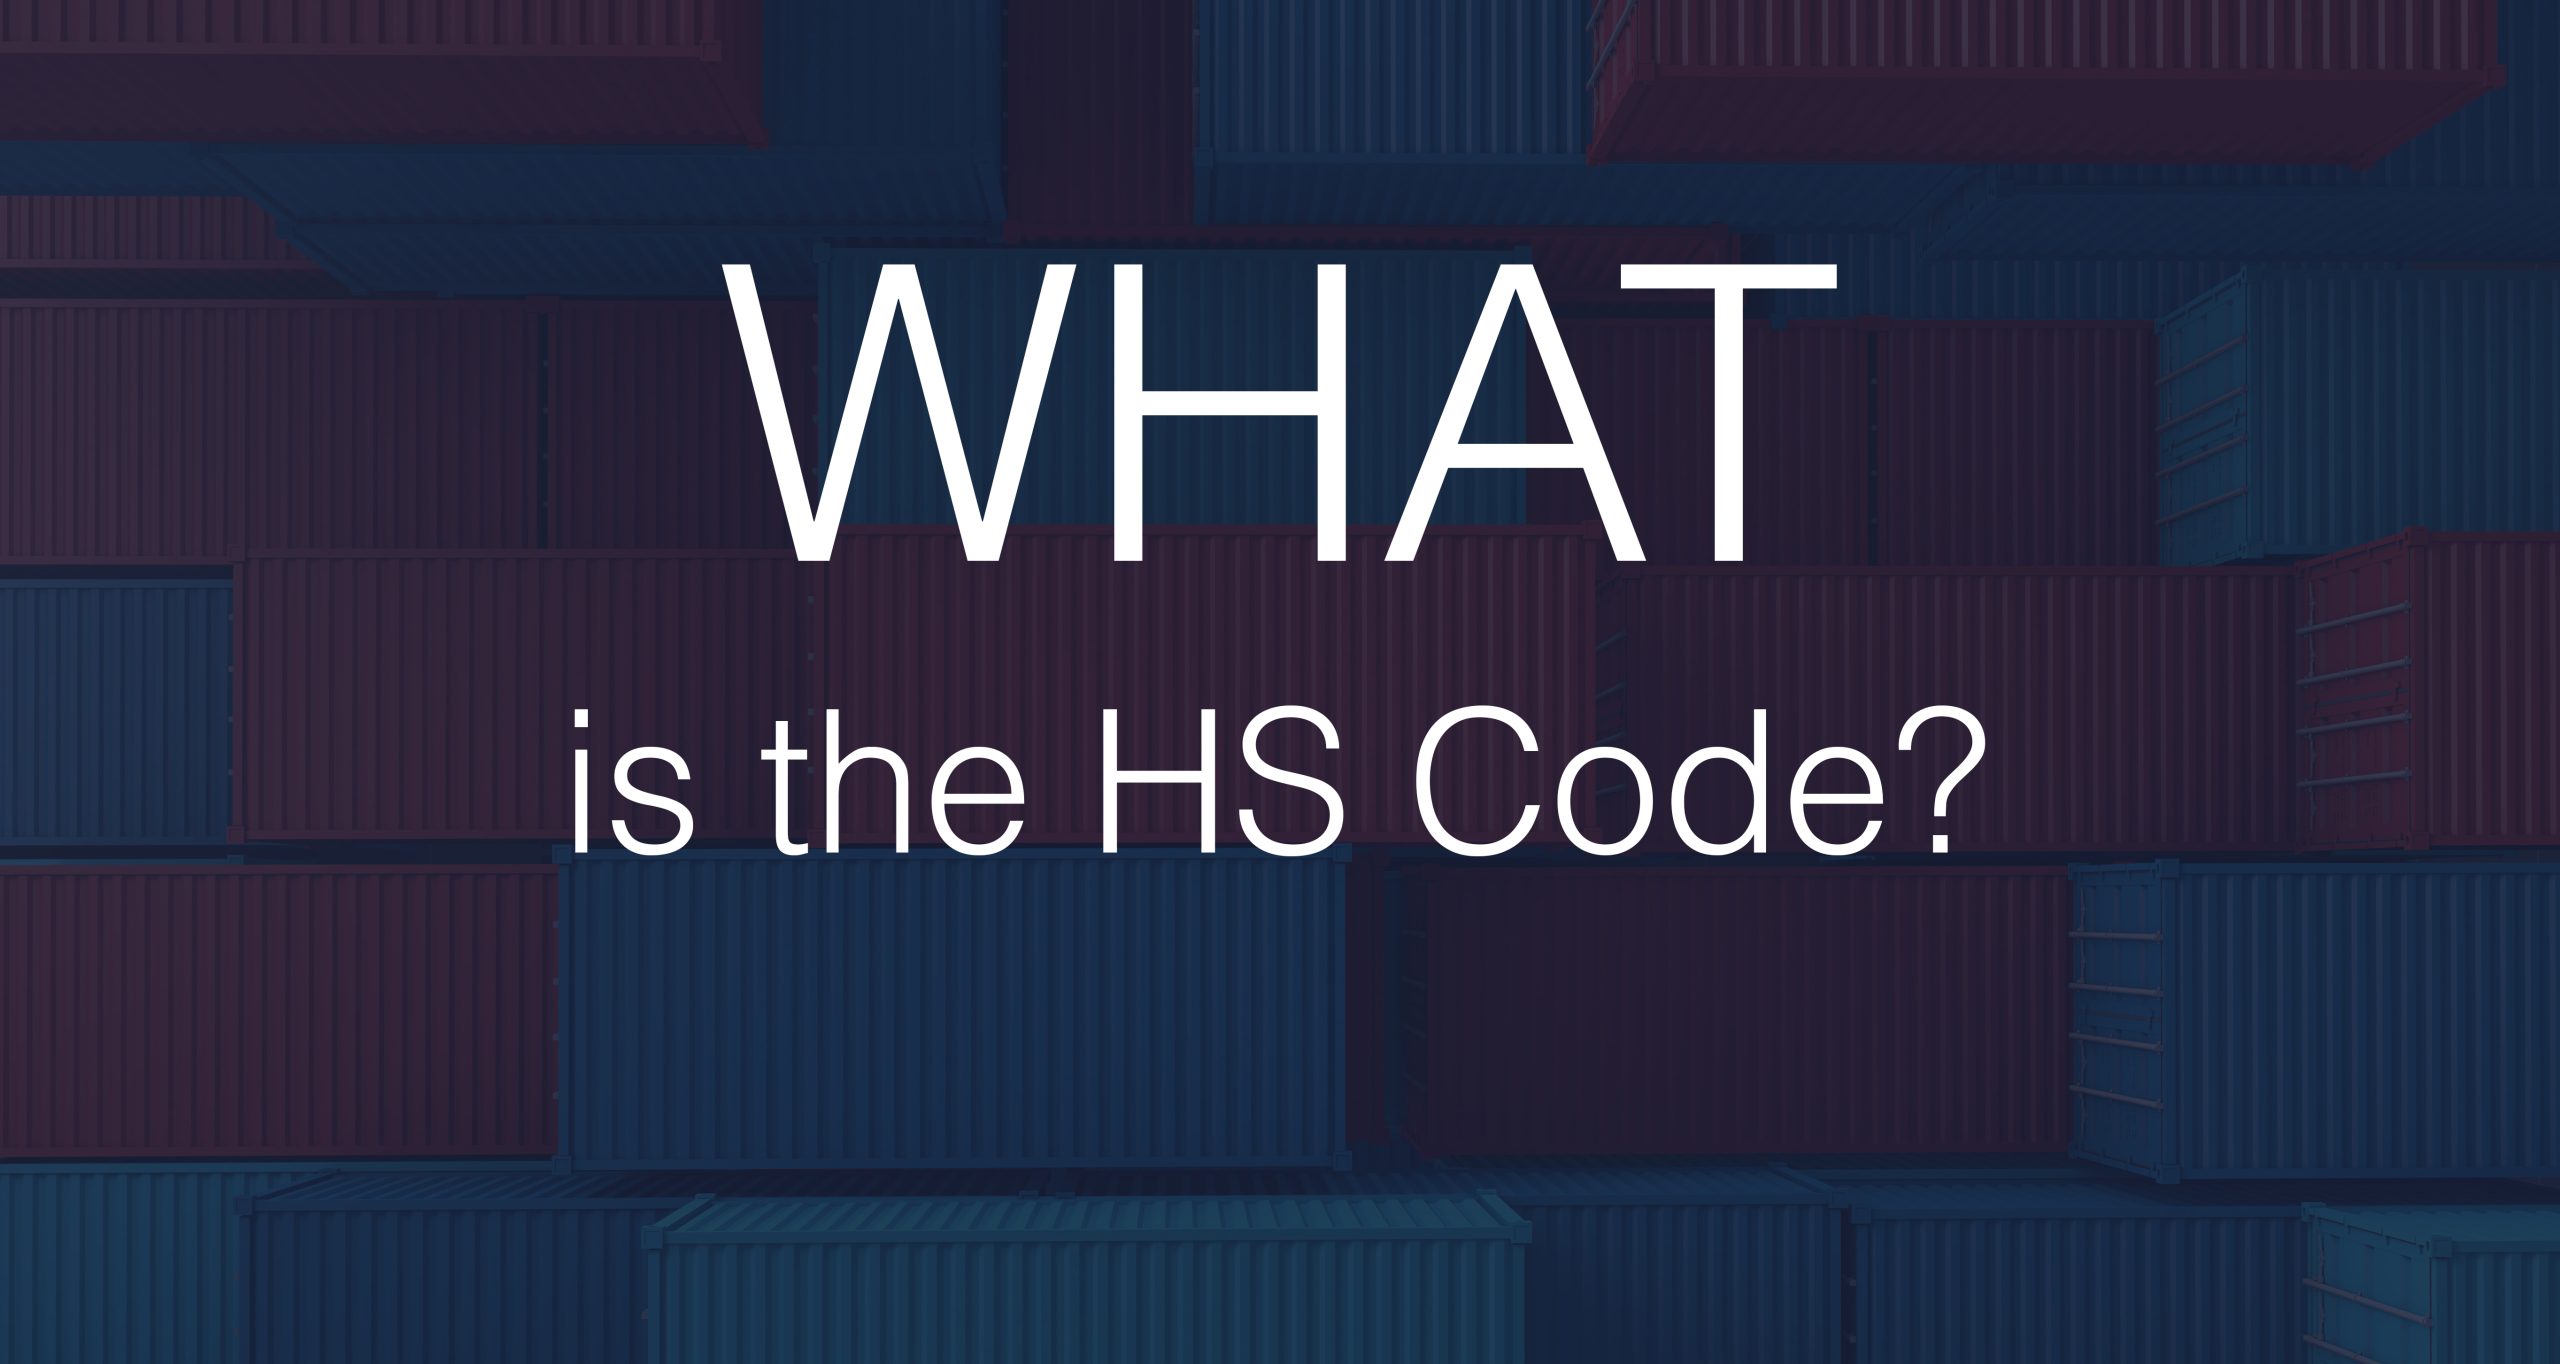 What is the HS Code meaning and how to obtain it in Saudi Arabia?